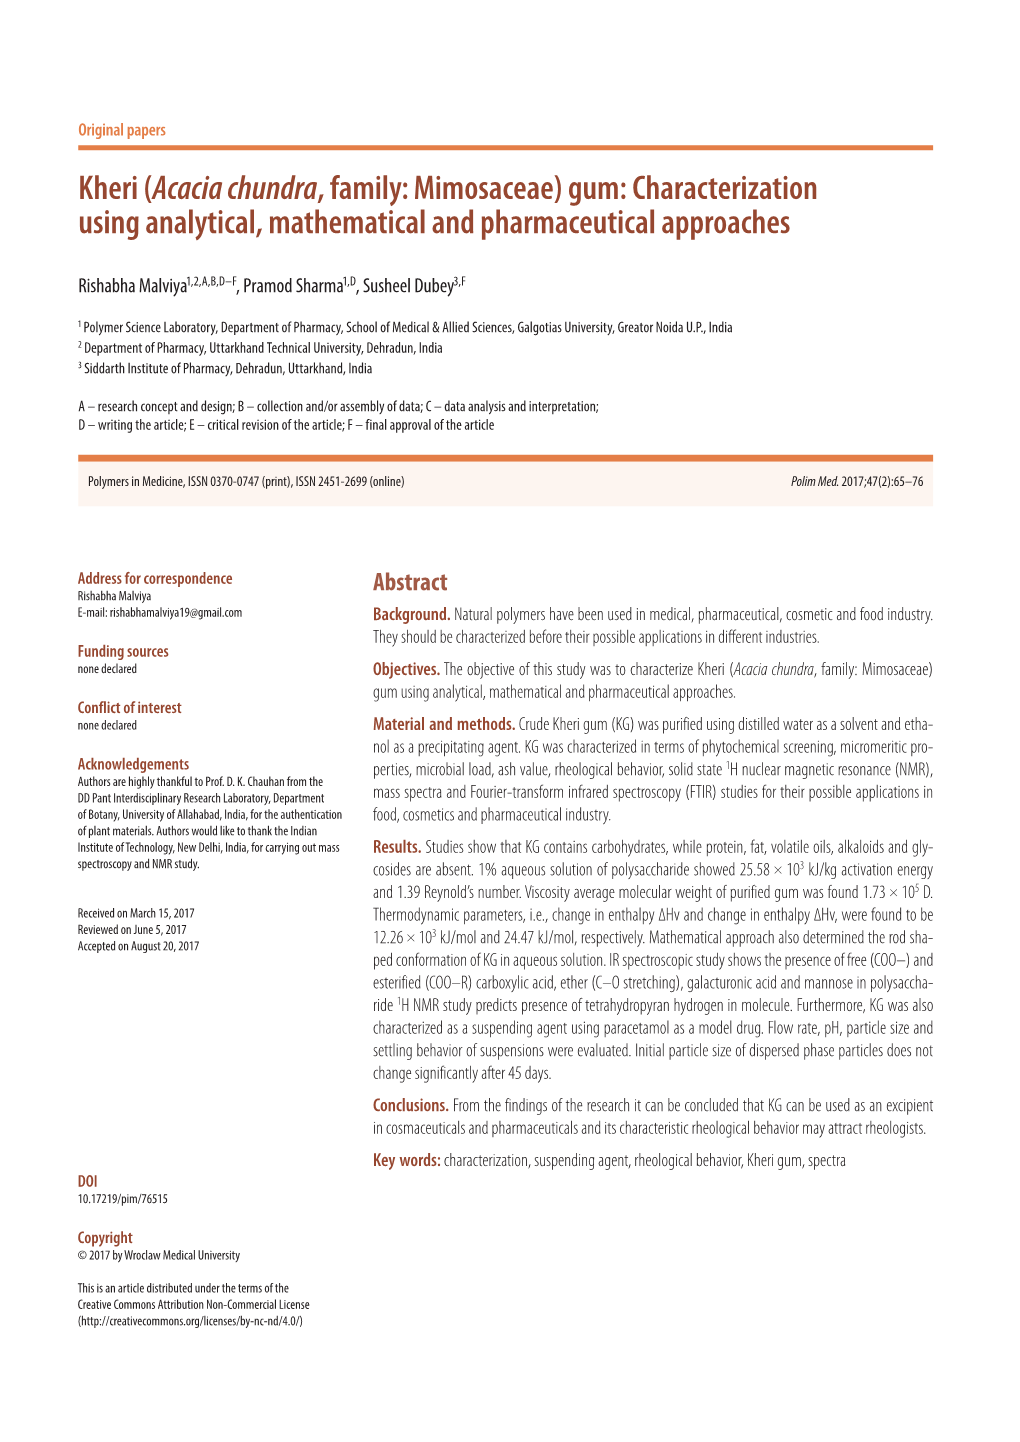 Gum: Characterization Using Analytical, Mathematical and Pharmaceutical Approaches